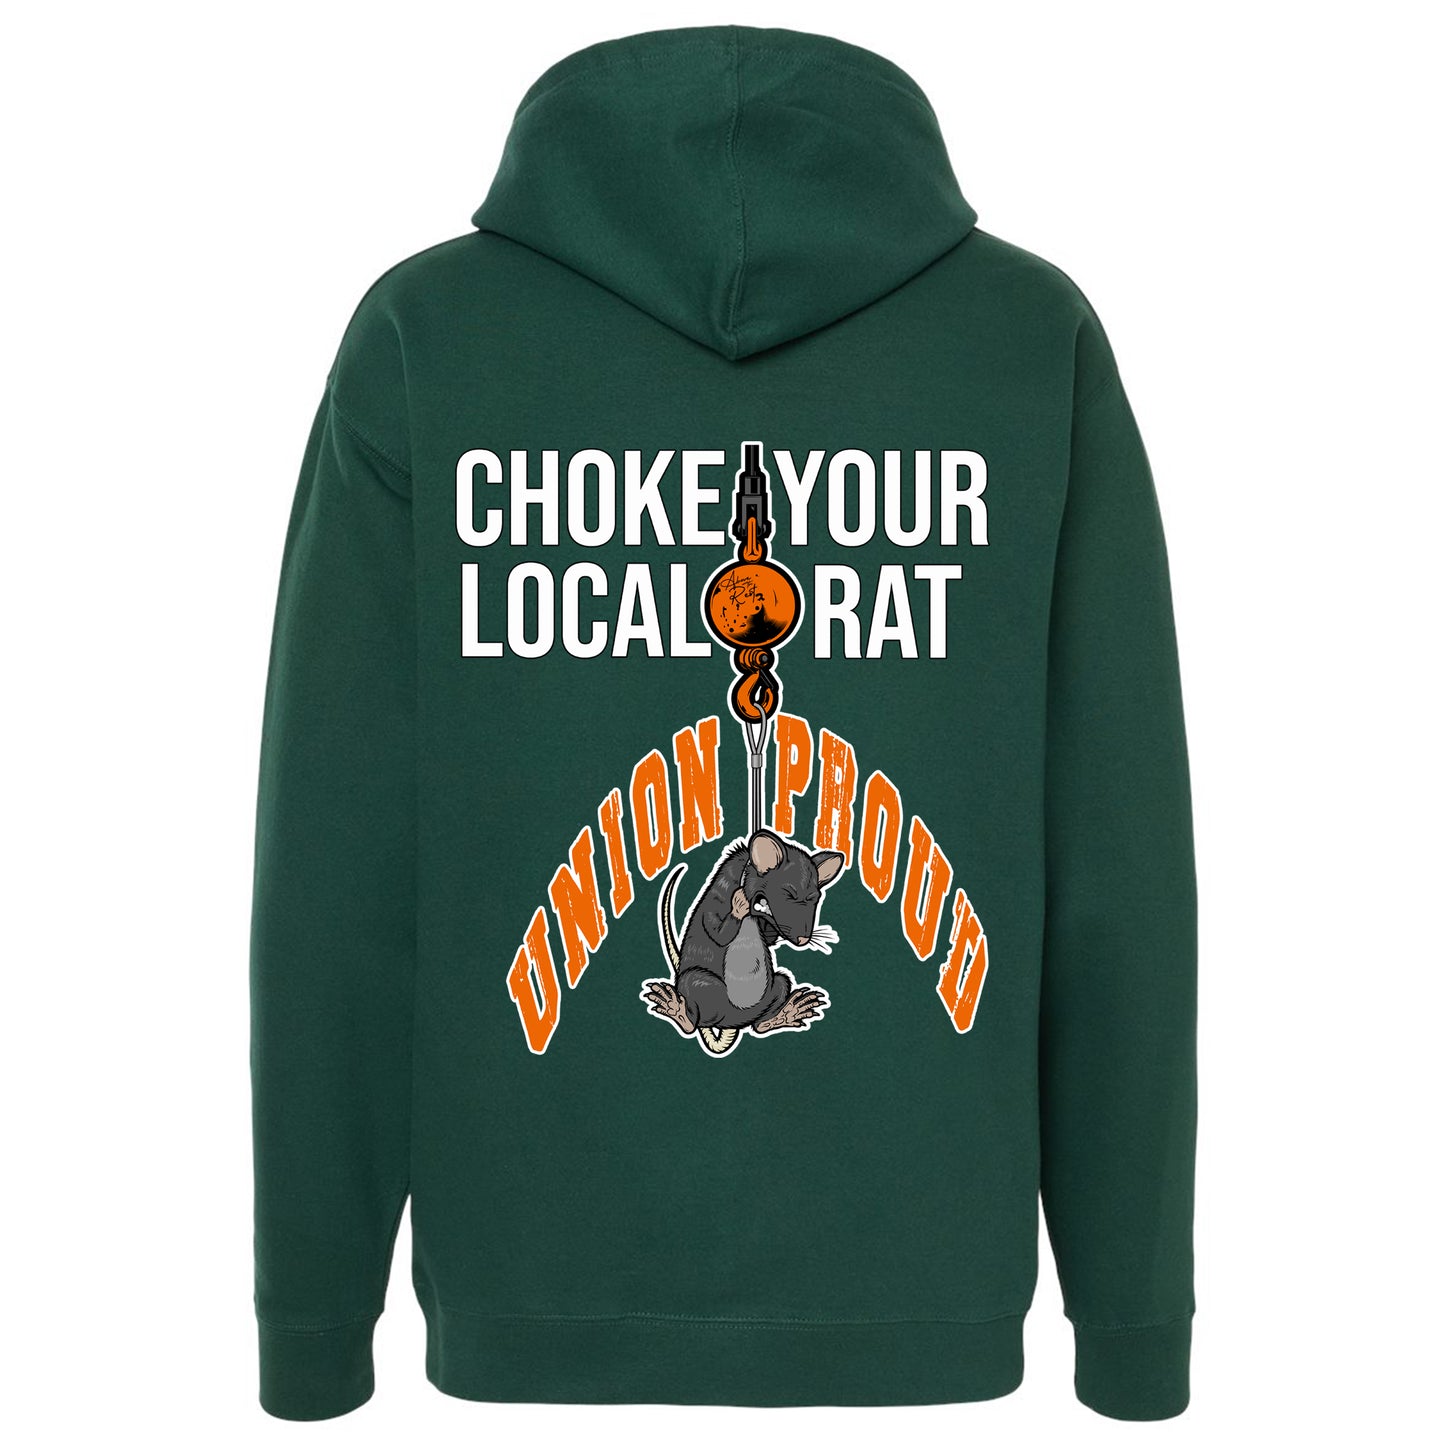 CHOKE YOUR LOCAL RAT PULLOVER HOODIE